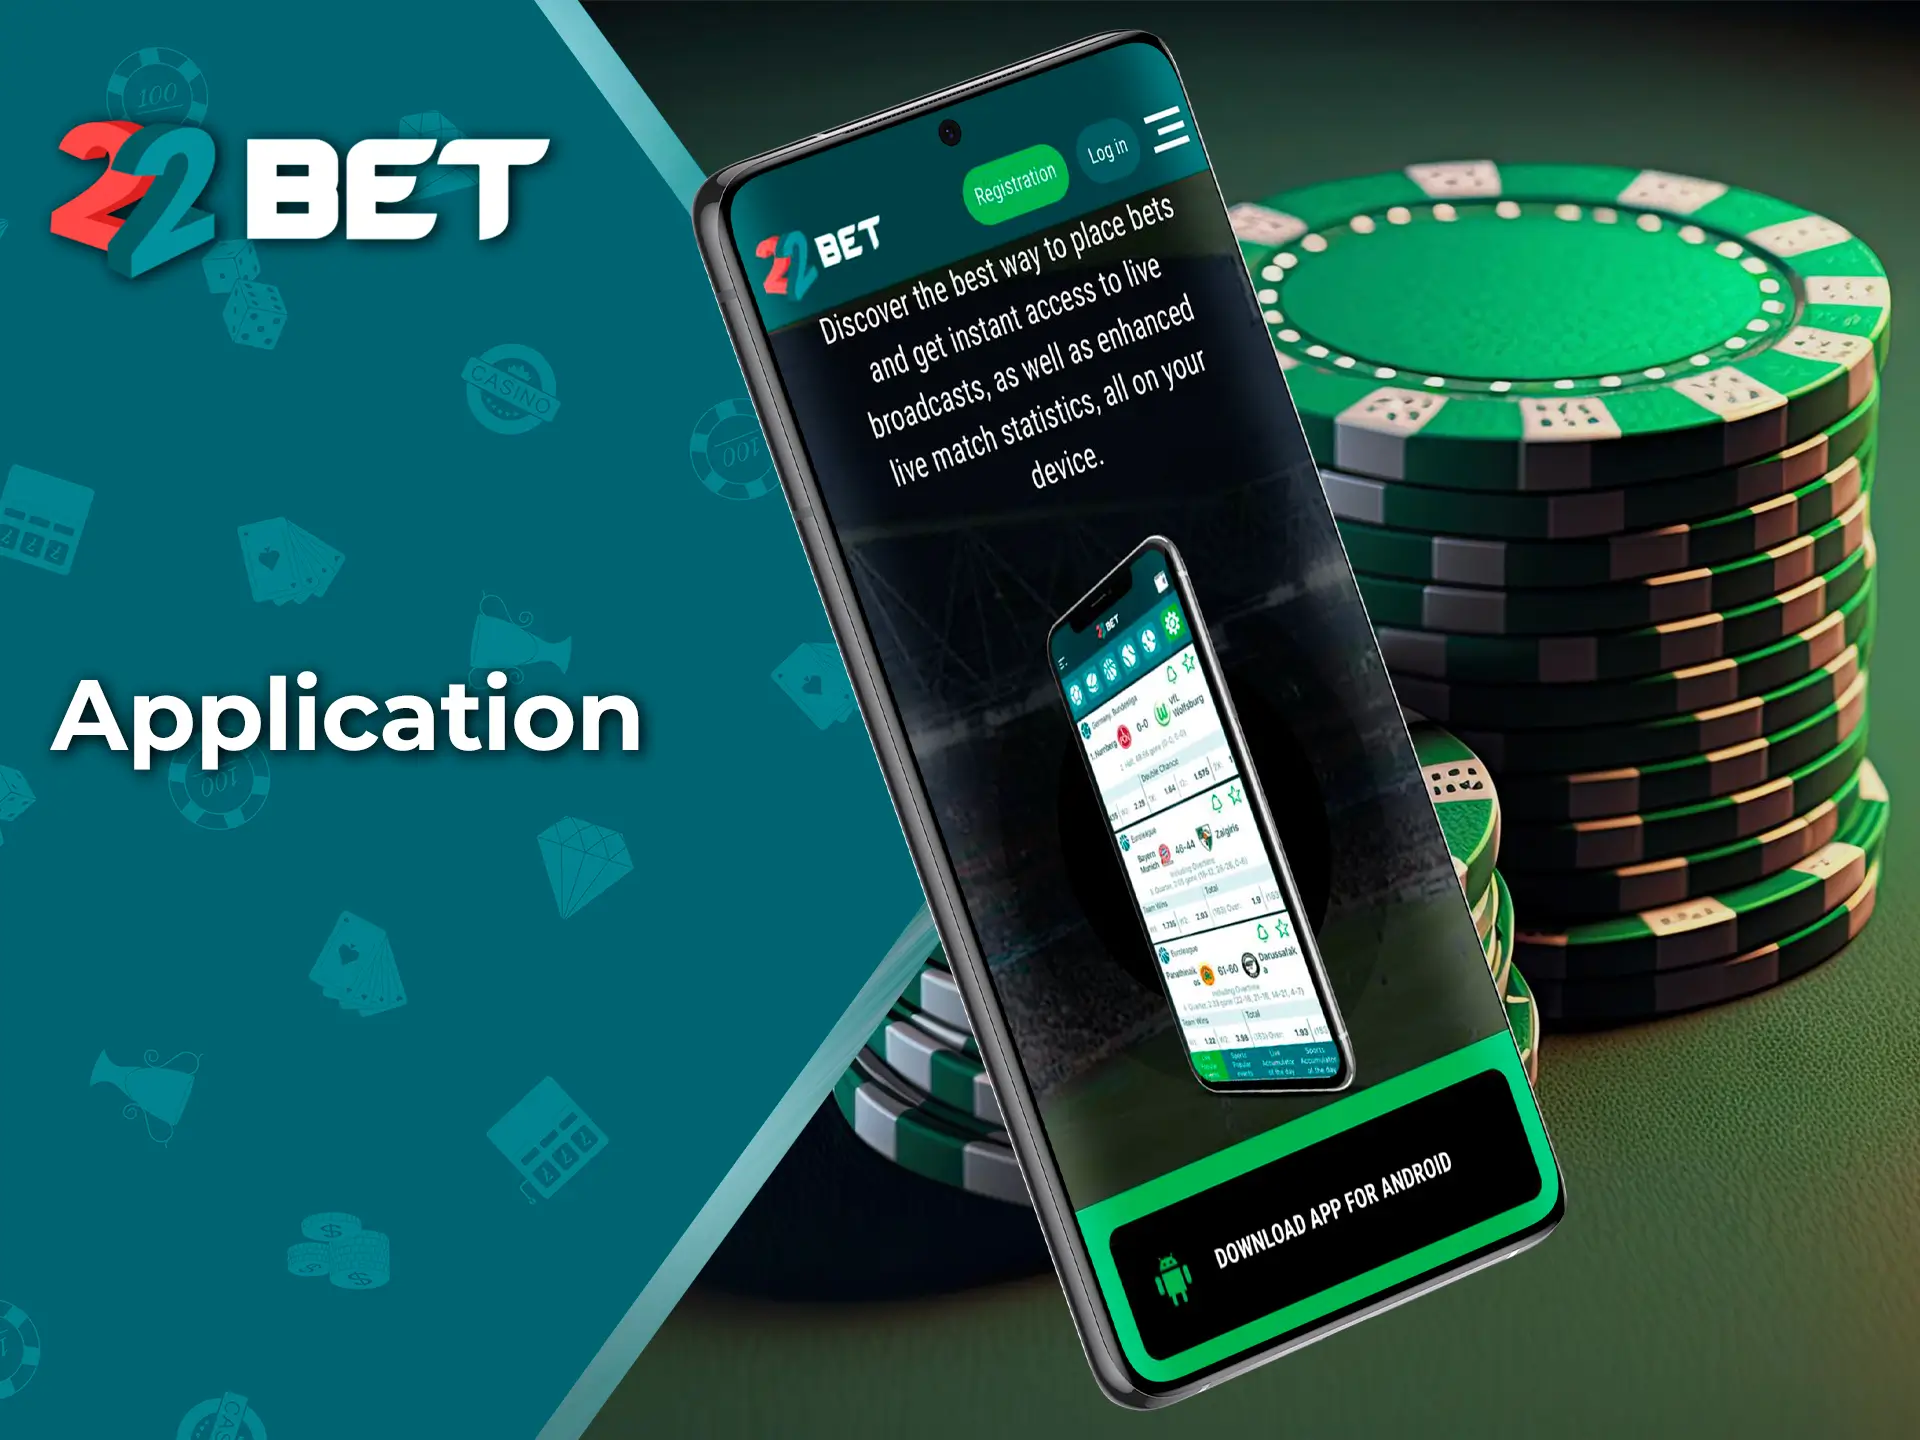 Download the handy 22Bet app for quick access to all your favourite games.